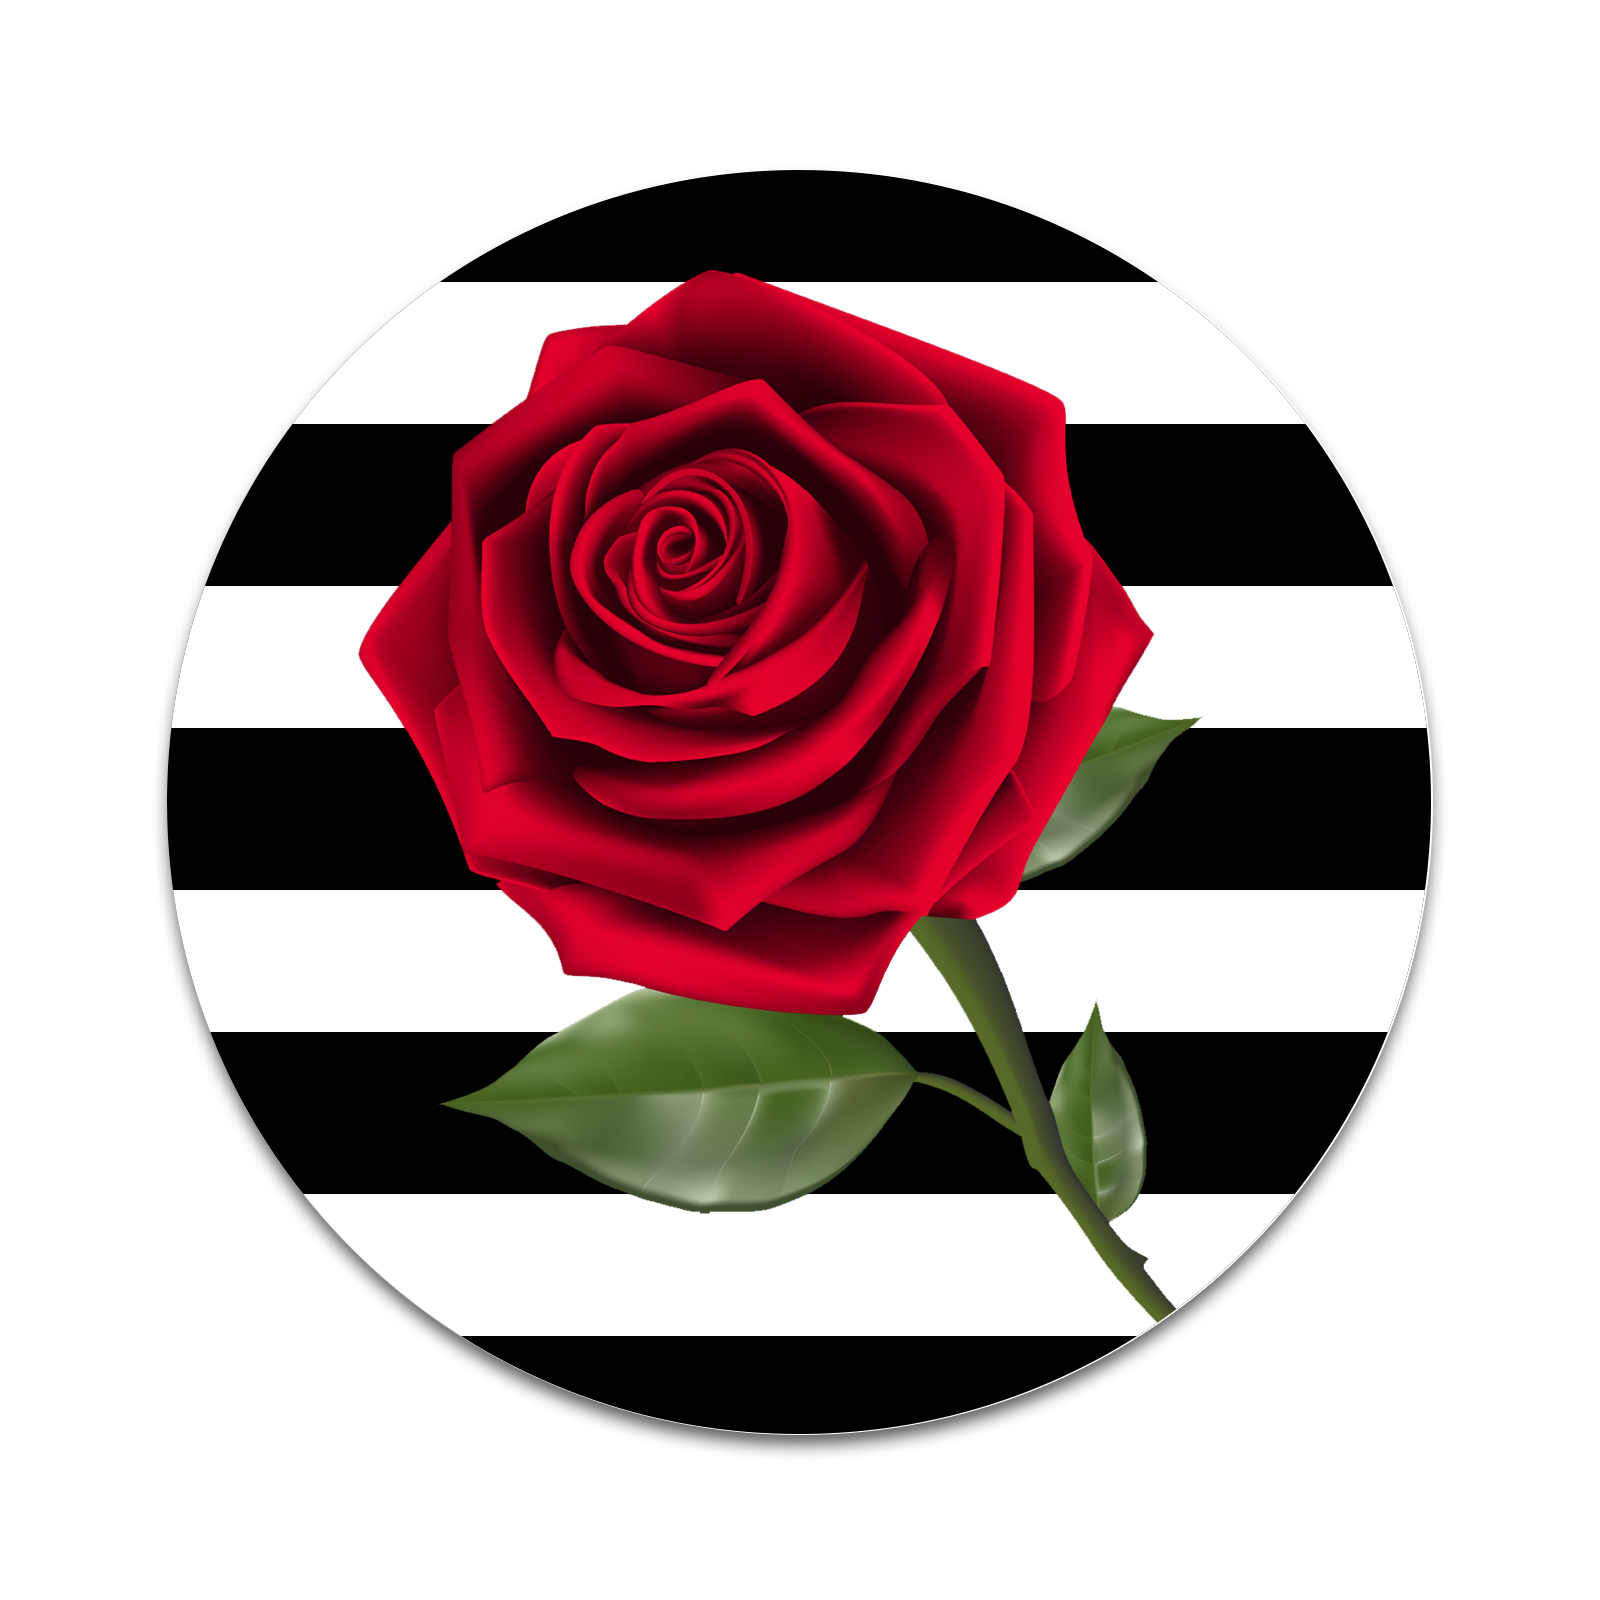 Stripes and Red Rose 2 Sticker Set for Pop Grip Stent for Phones and ...